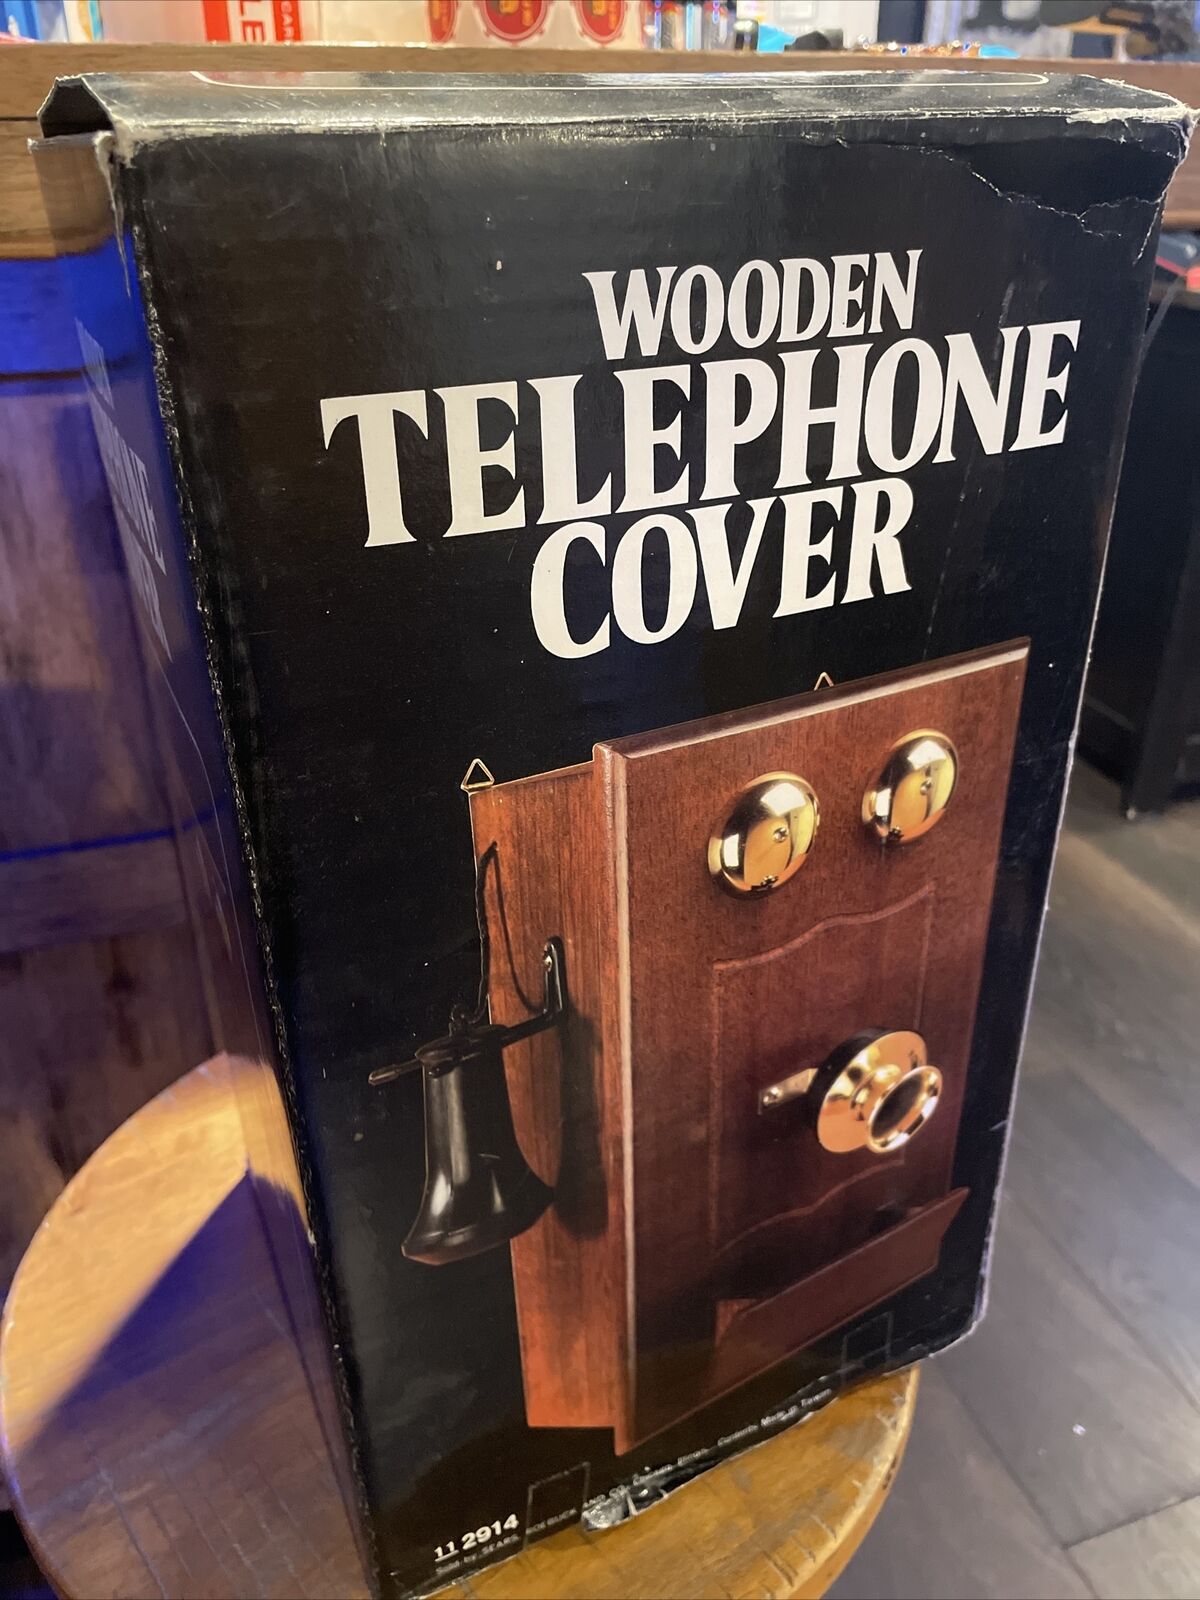 Vintage Wooden Telephone Cover - Sears, Roebuck And Co. Model # 11 2914 - New